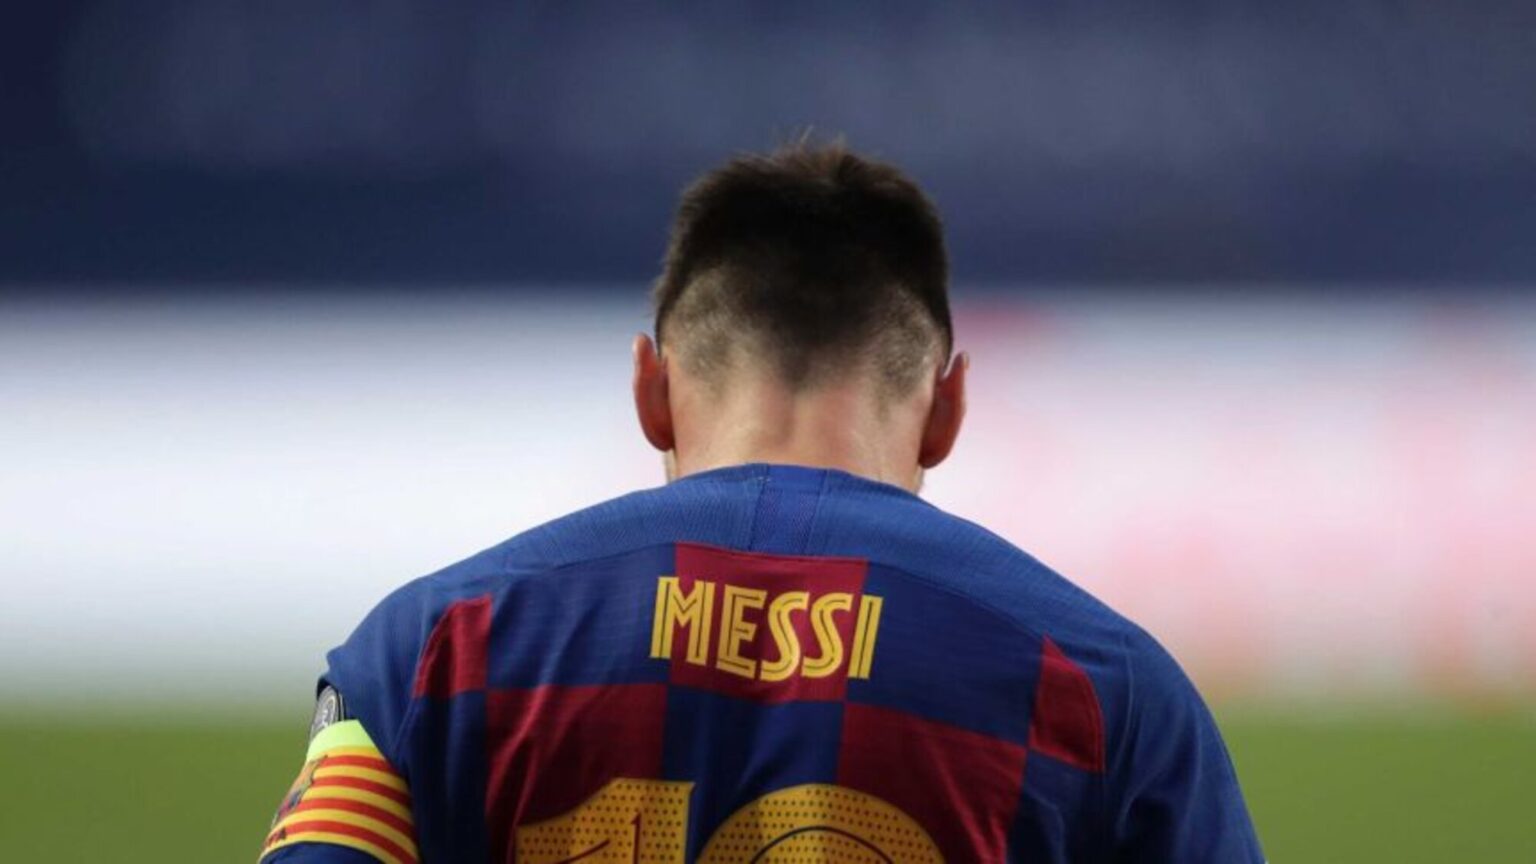 The rumors are continuing to swirl that football legend Lionel Messi is leaving FC Barcelona this year, and if he does, this is bad news for Barcelona.